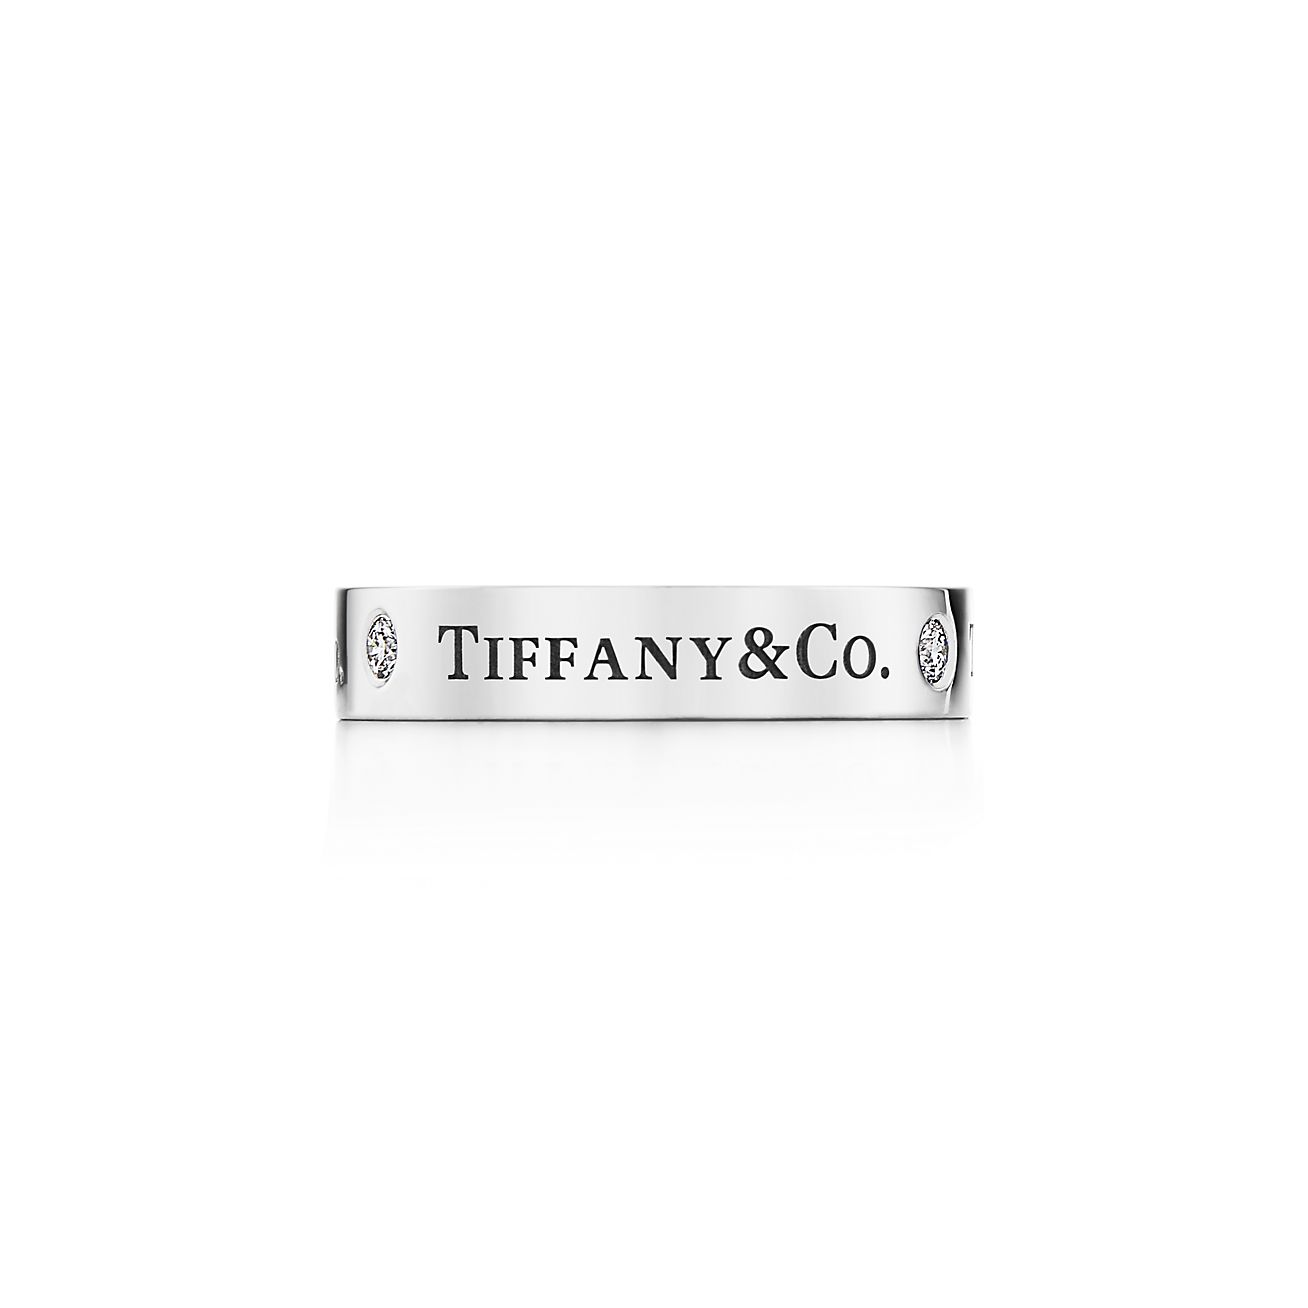 Tiffany & Co.® band ring in platinum with diamonds, 4 mm